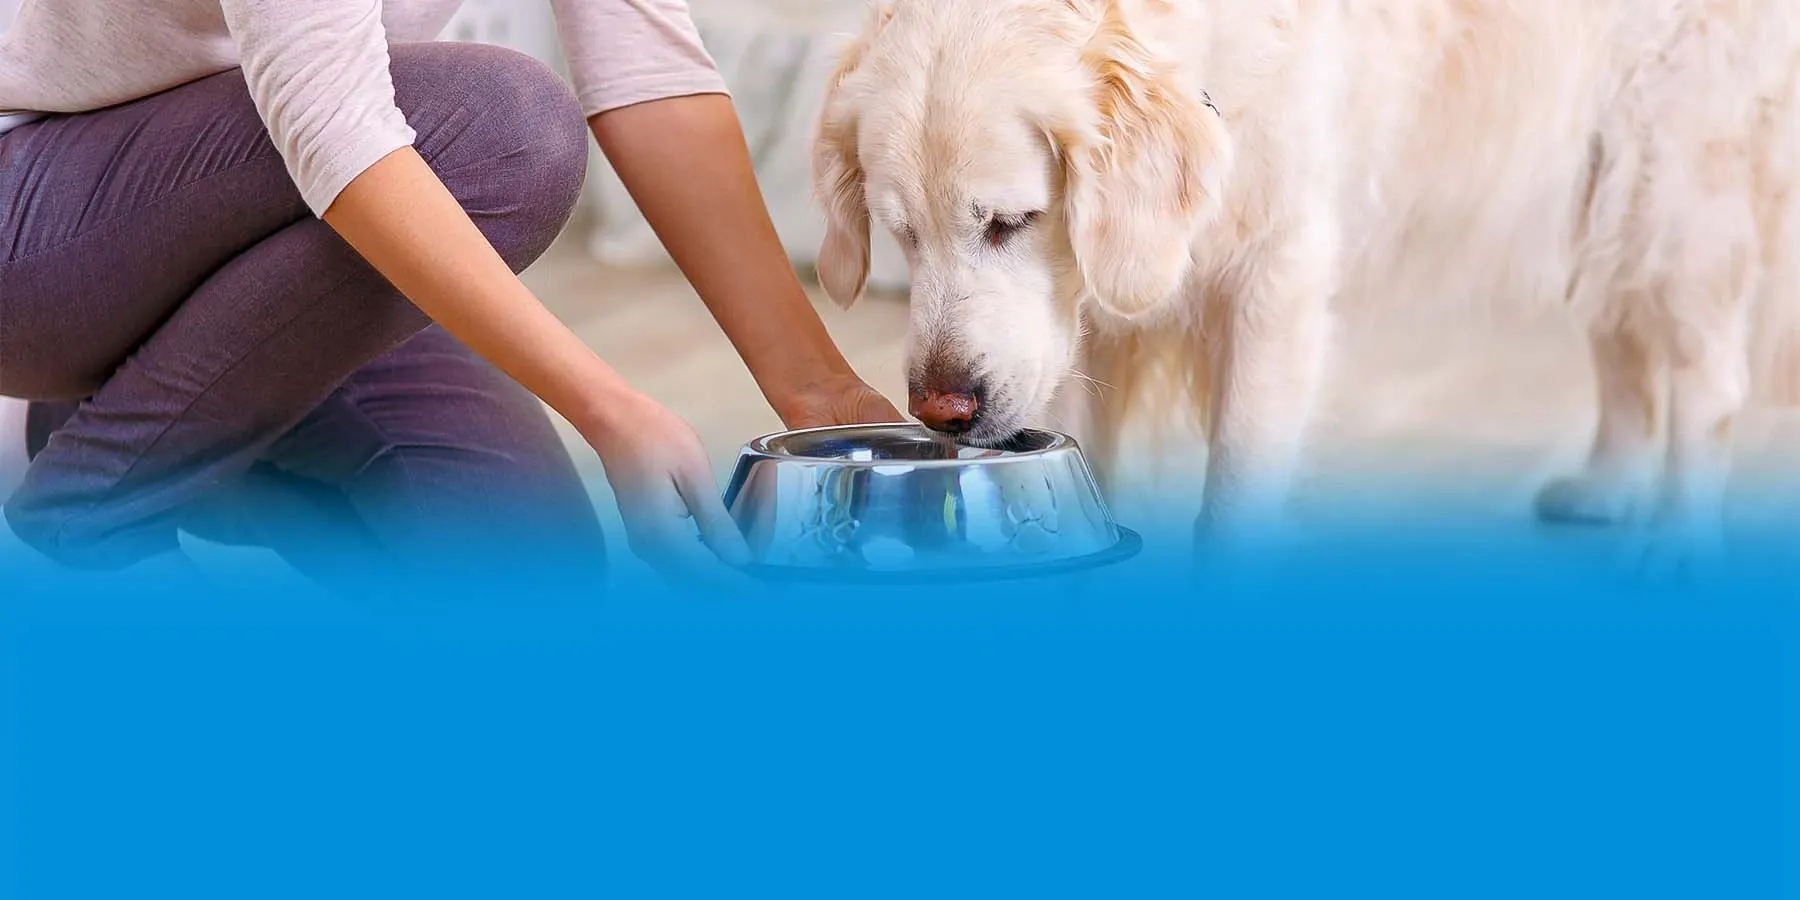 A woman placing a bowl of food in front of a white Labrador Retriever.